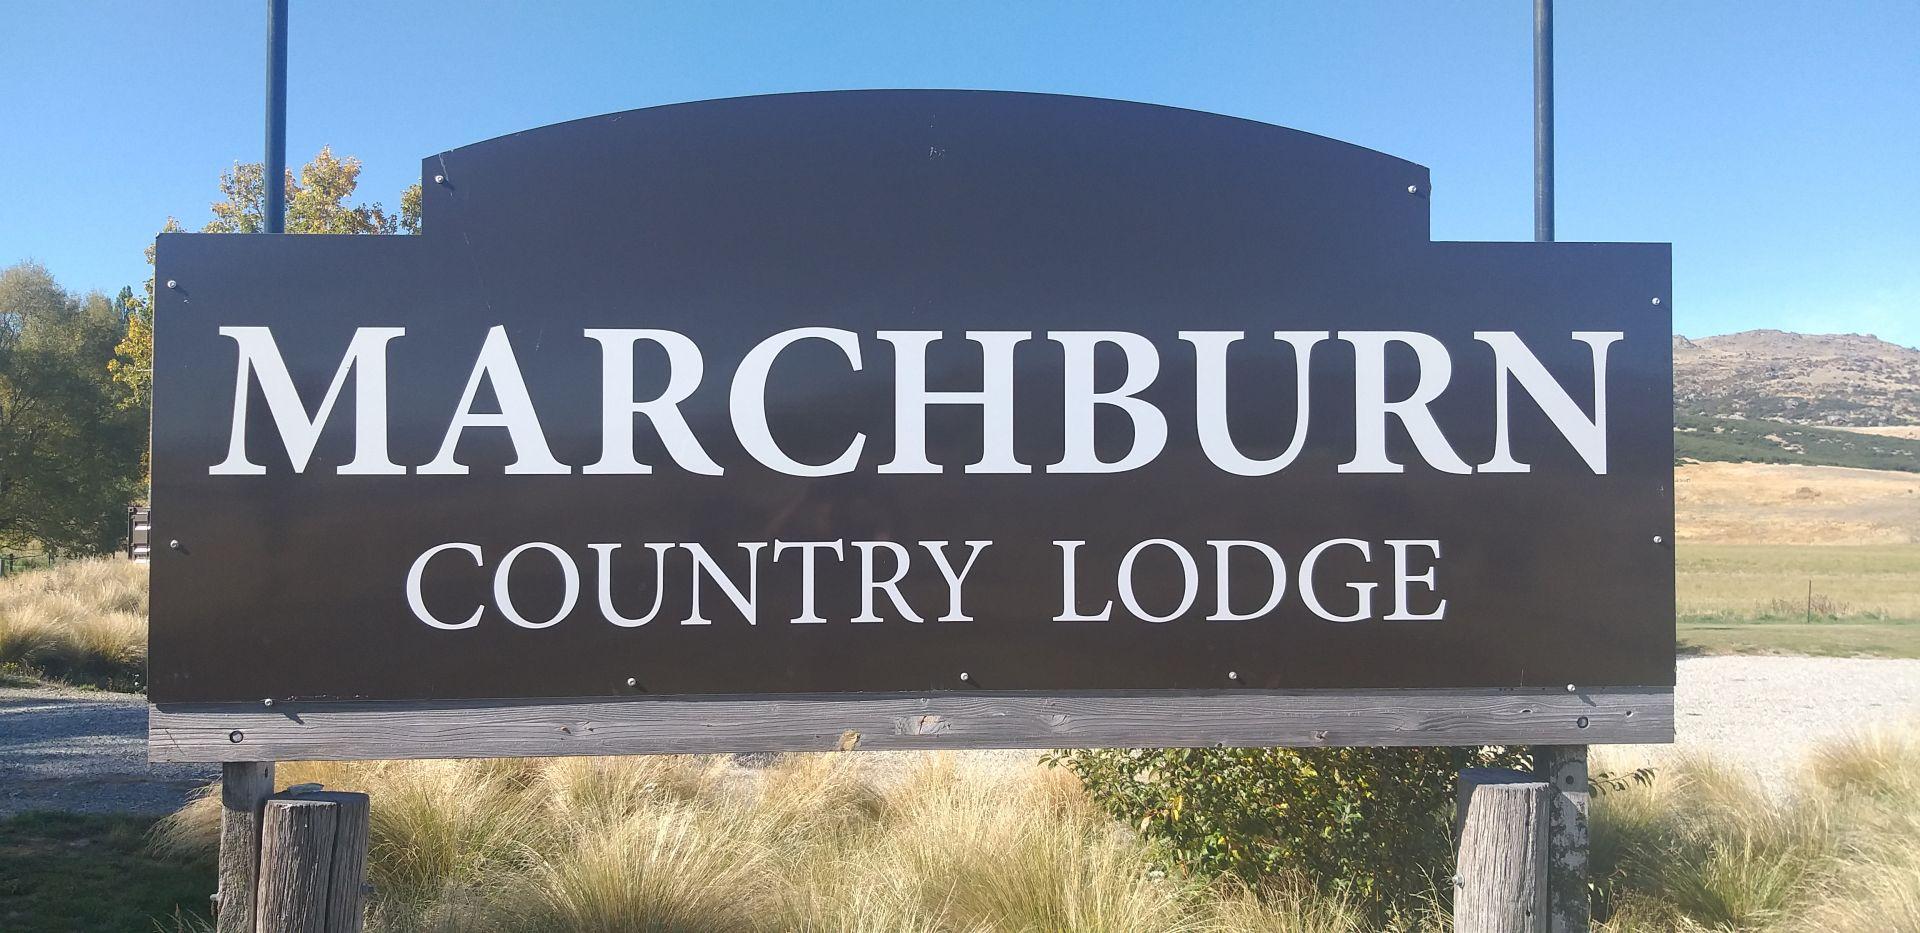 Marchburn Country Lodge in Central Otago